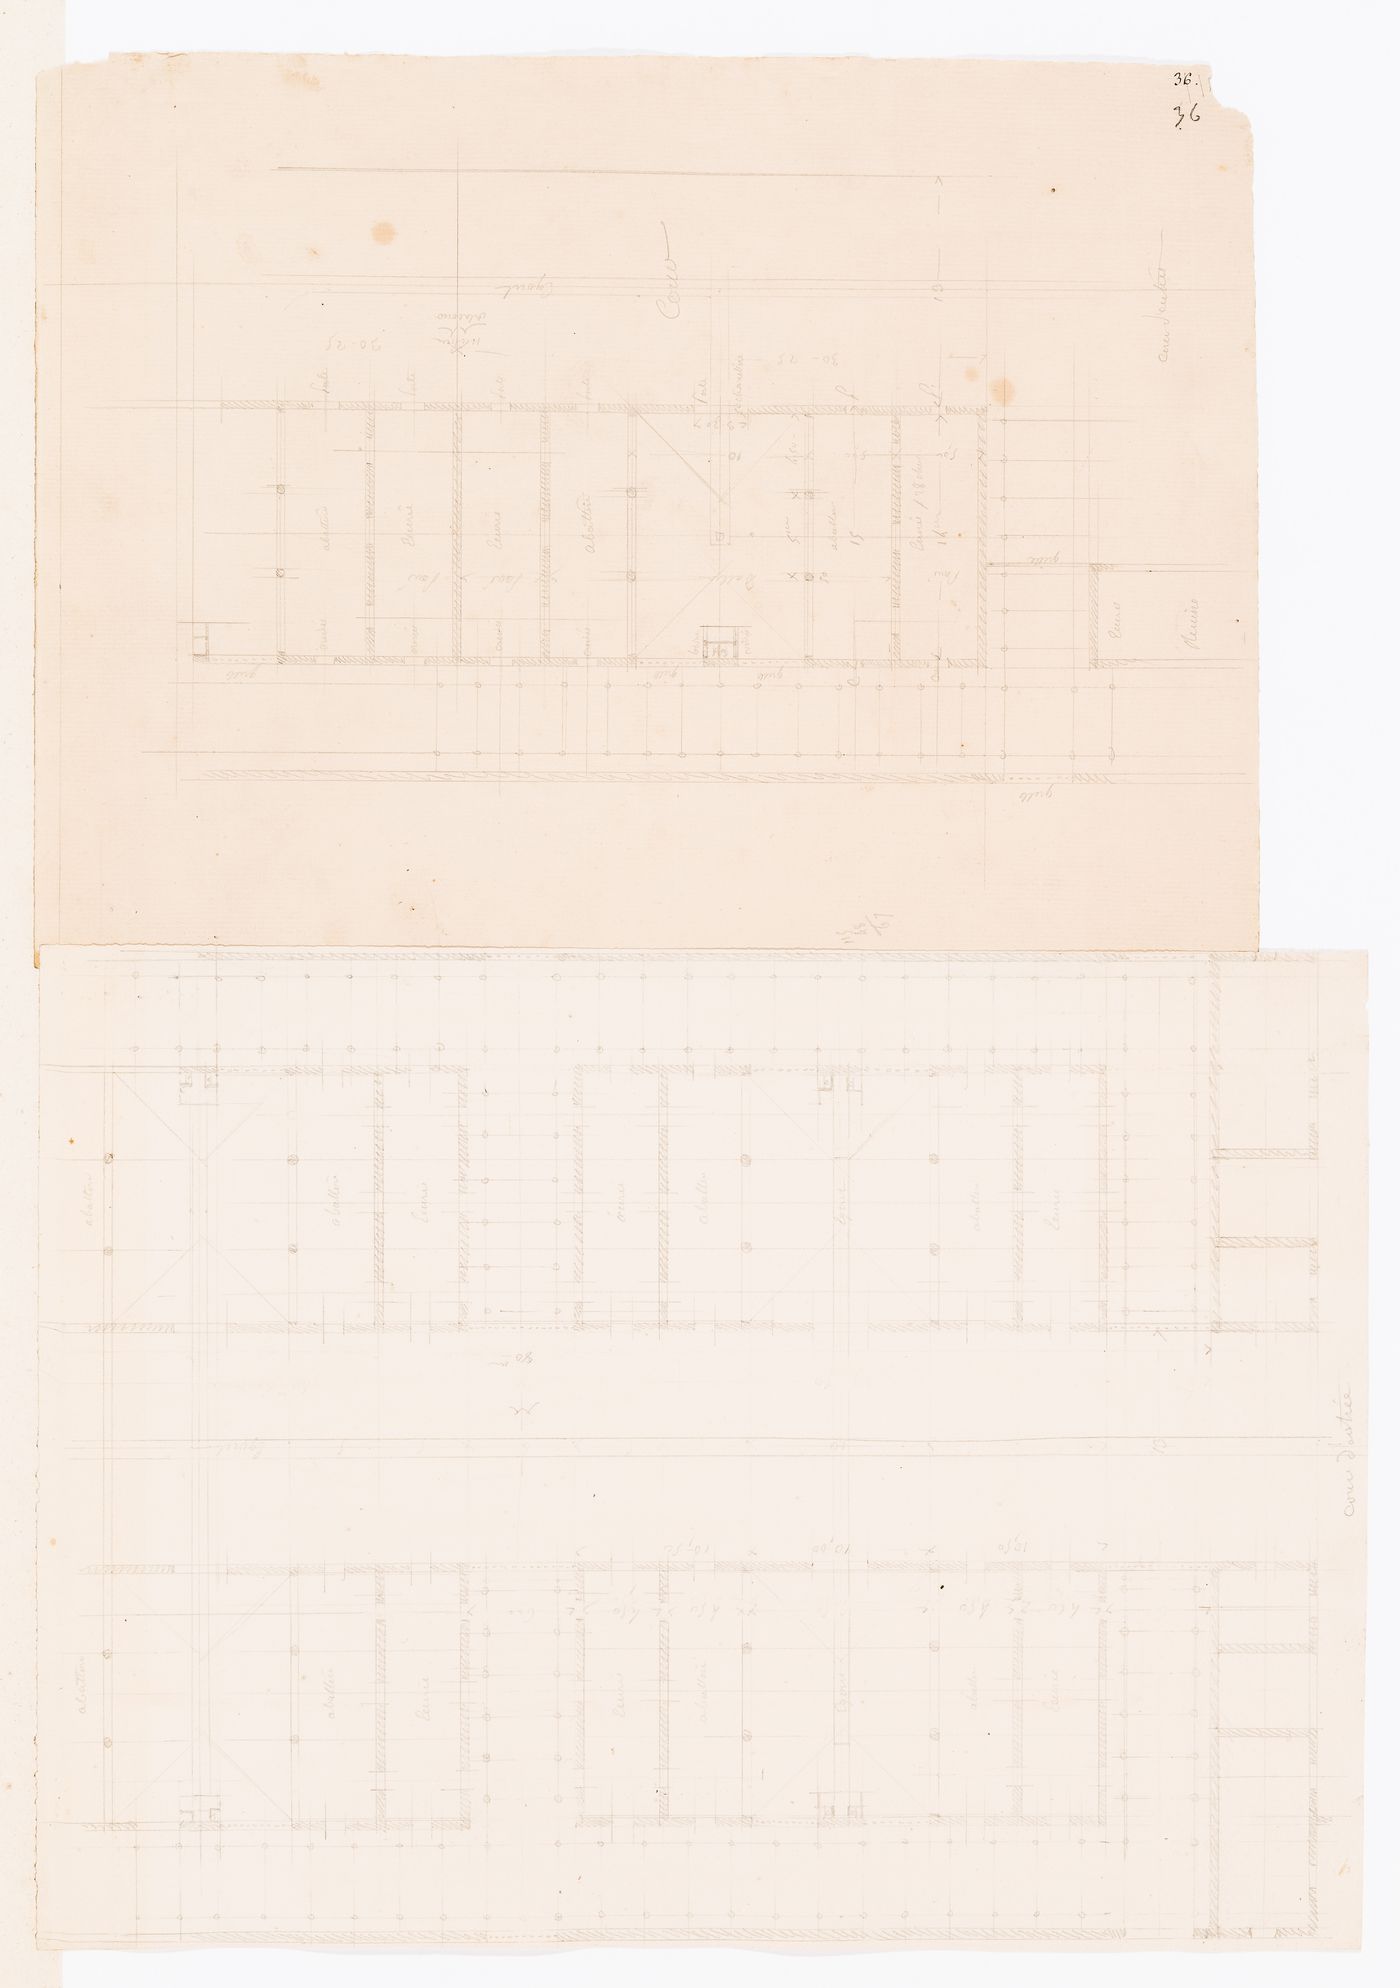 Project for a horse slaughterhouse, Plaine de Grenelle: Plans for two combined stables and slaughterhouses